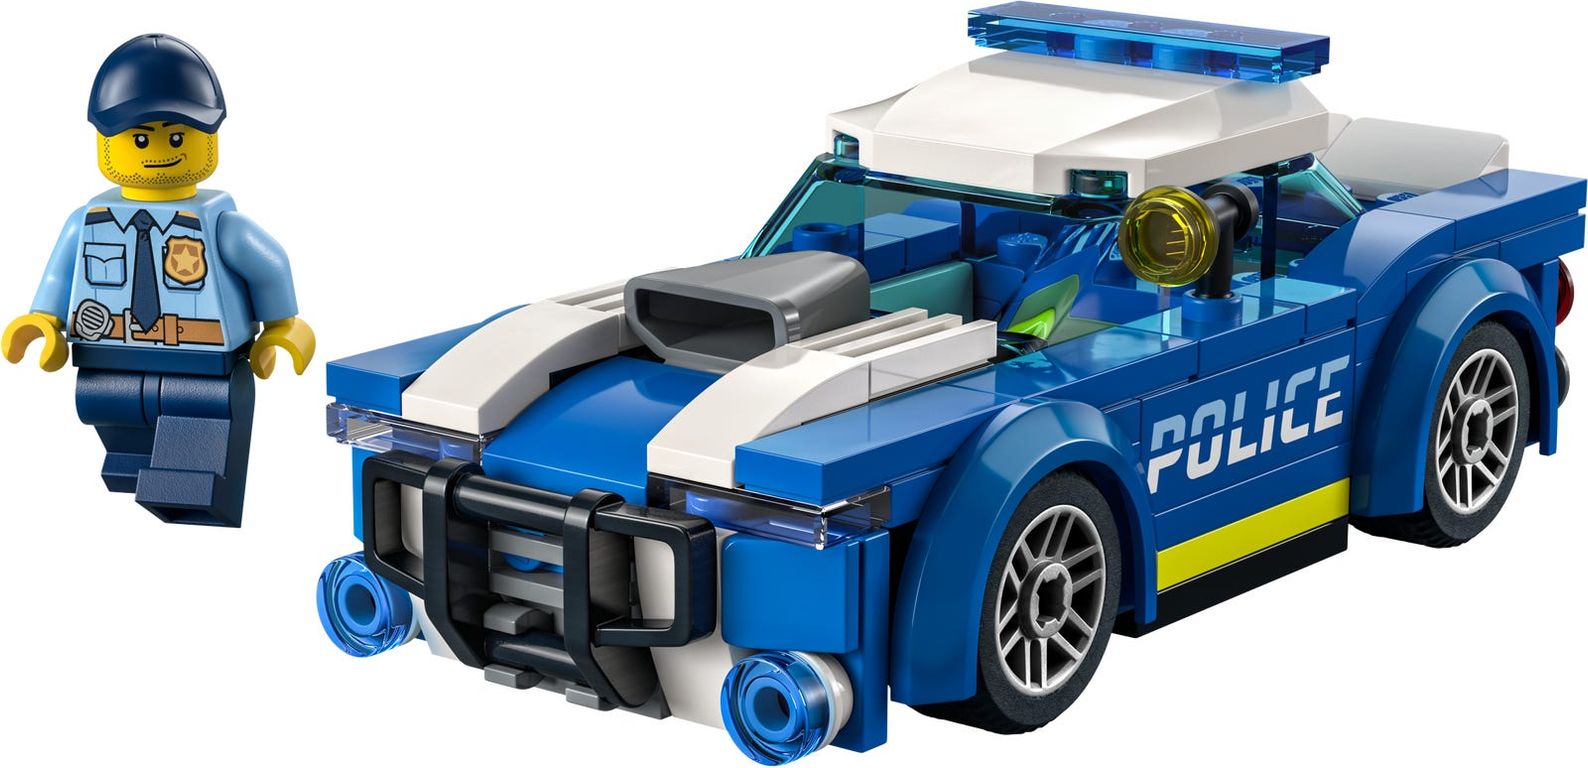 LEGO® City Police Car components